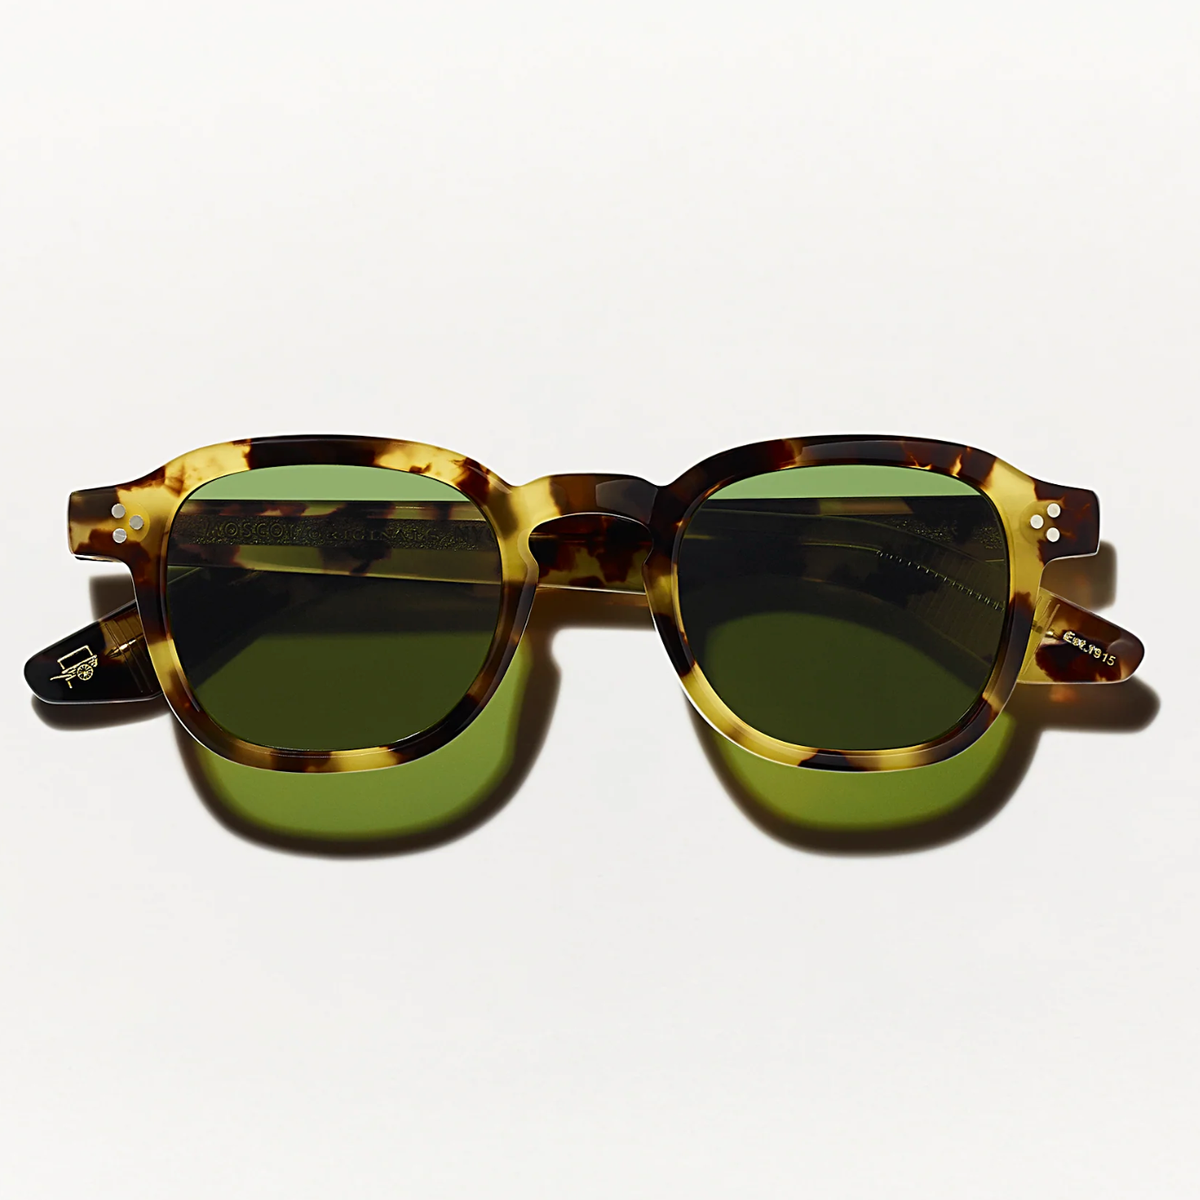 MOSCOT MONZA size 46